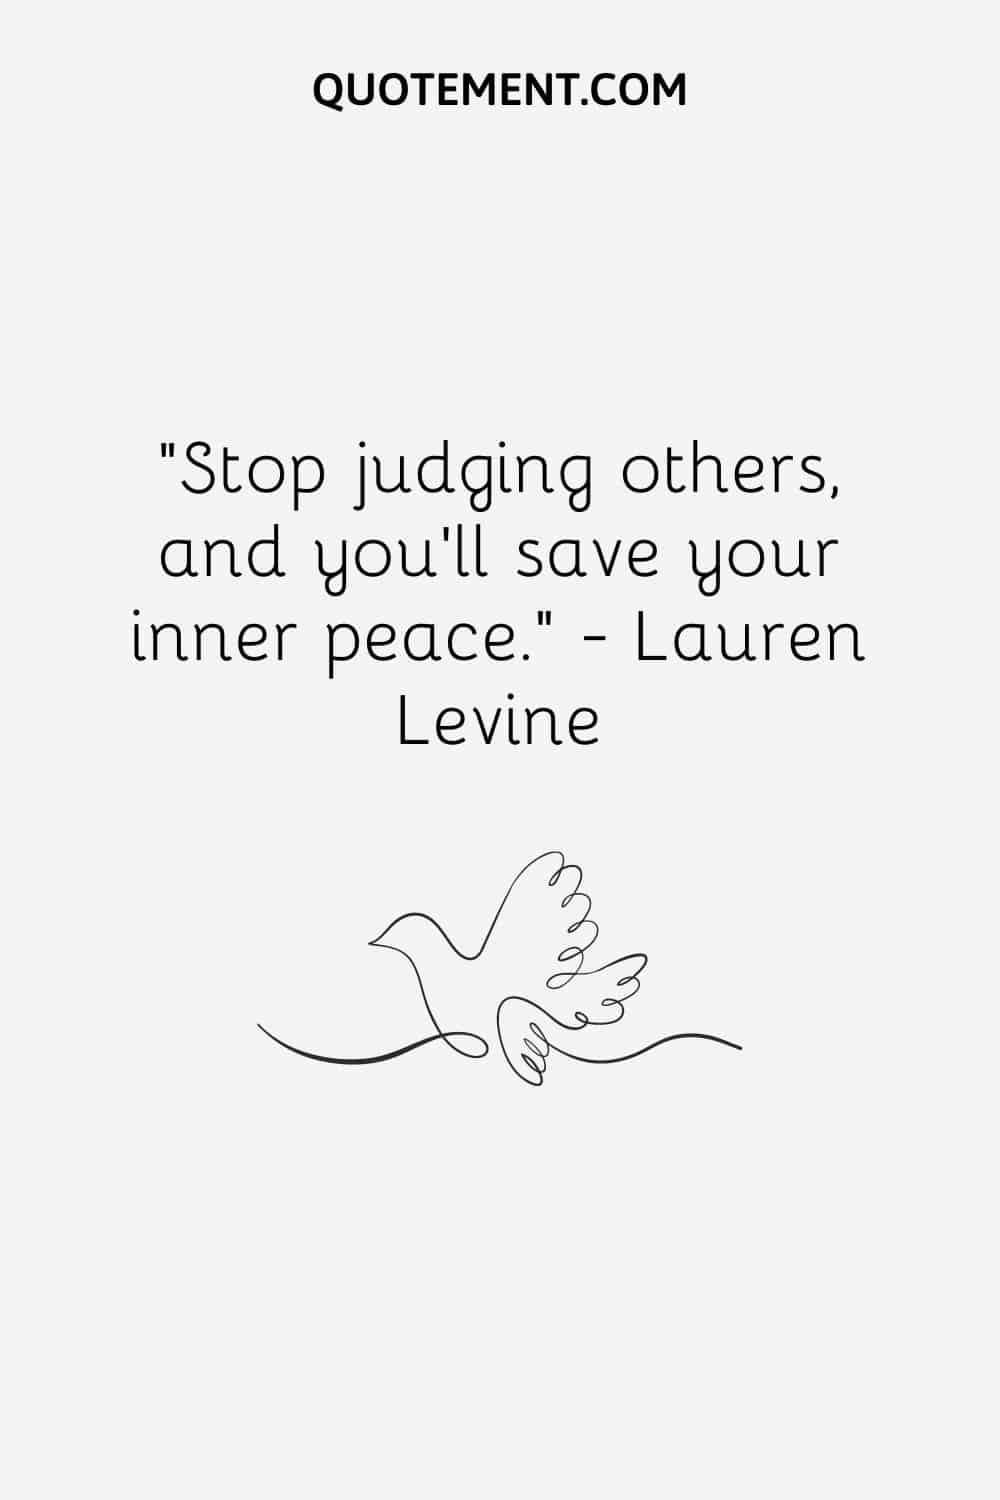 “Stop judging others, and you’ll save your inner peace.” — Lauren Levine